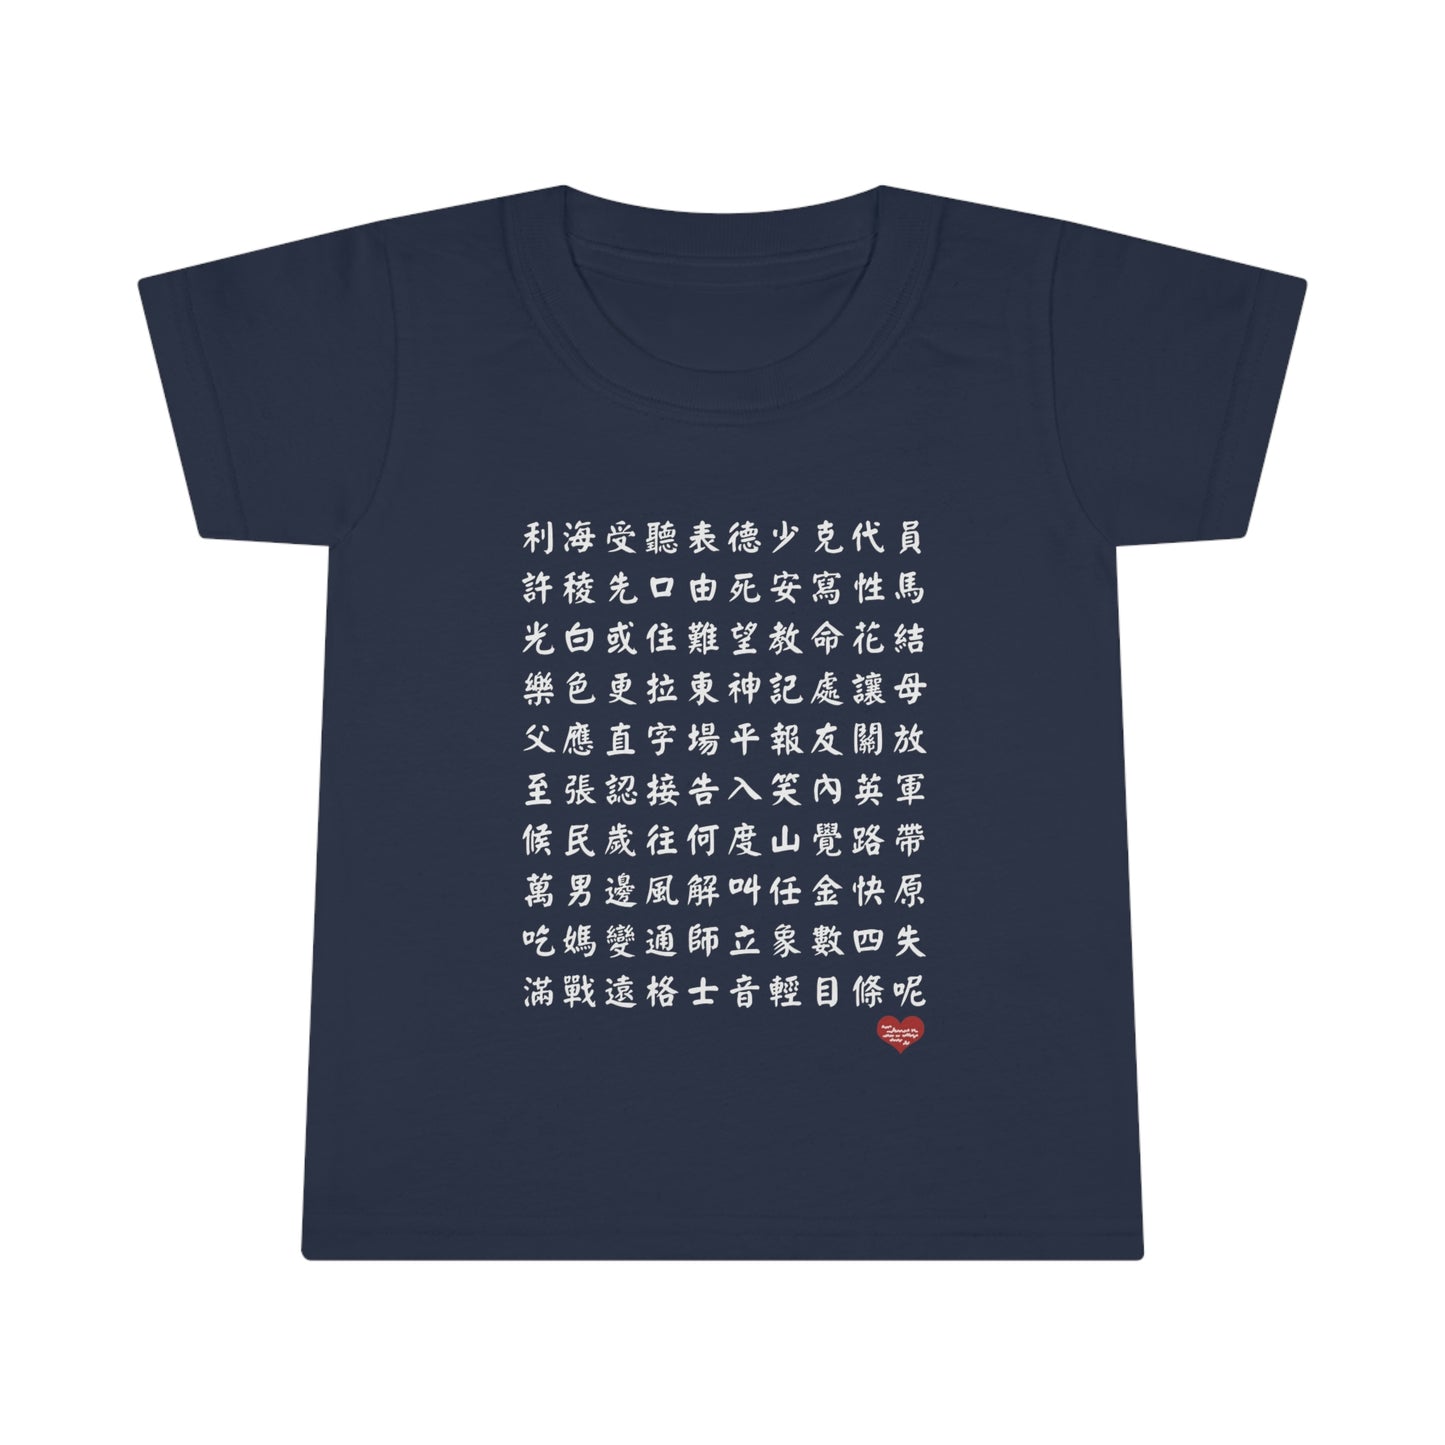 Toddler 1000 Characters Set 3,  1000漢字系列 #3 Color Block T-shirts